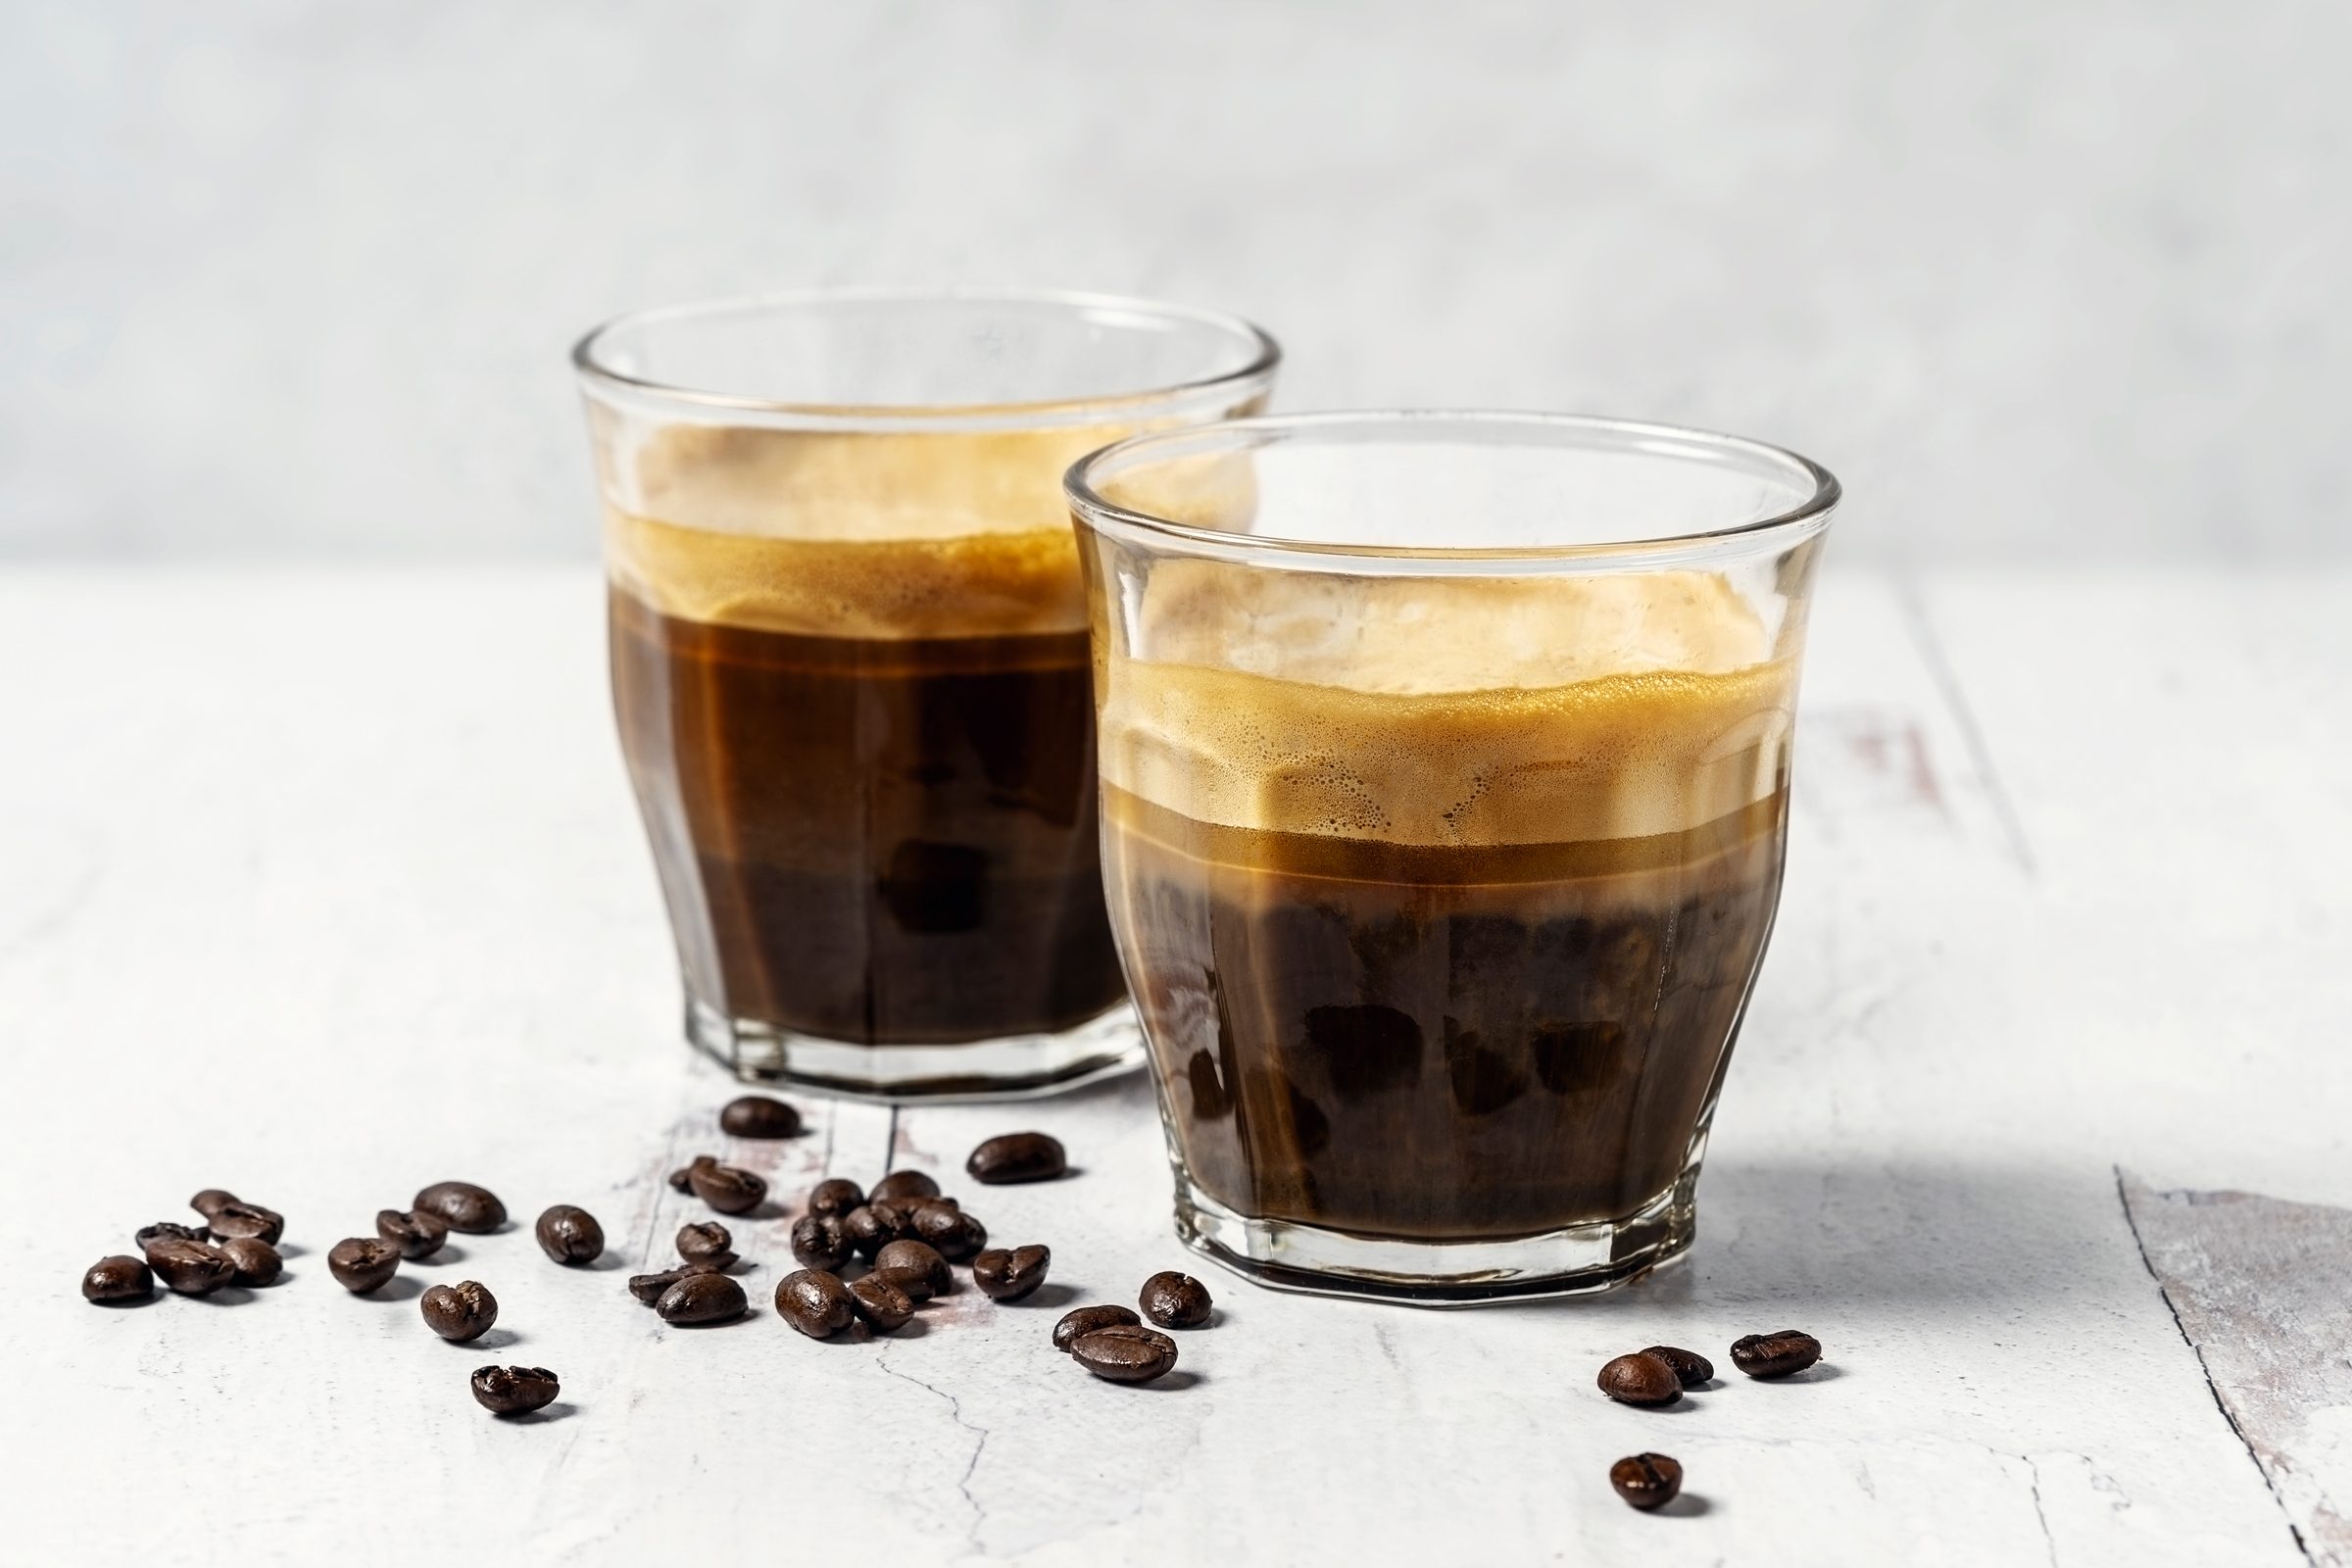 Enjoy your espresso with clean and clear Glass Espresso Cups